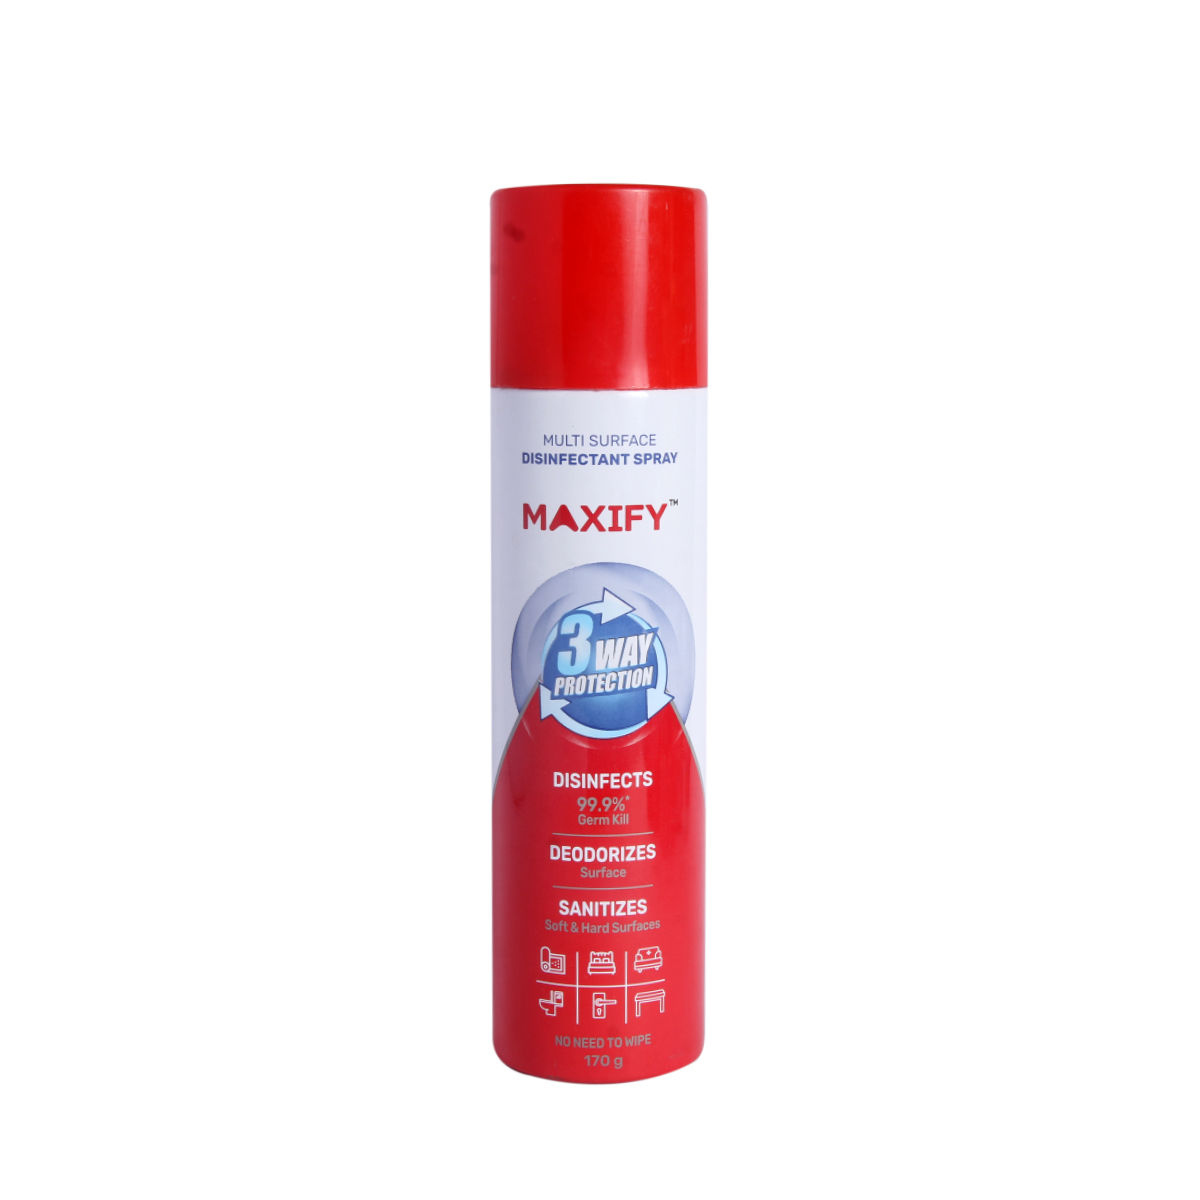 Maxify Multisurface Disinfectant Spray, 170 gm, Pack of 1 